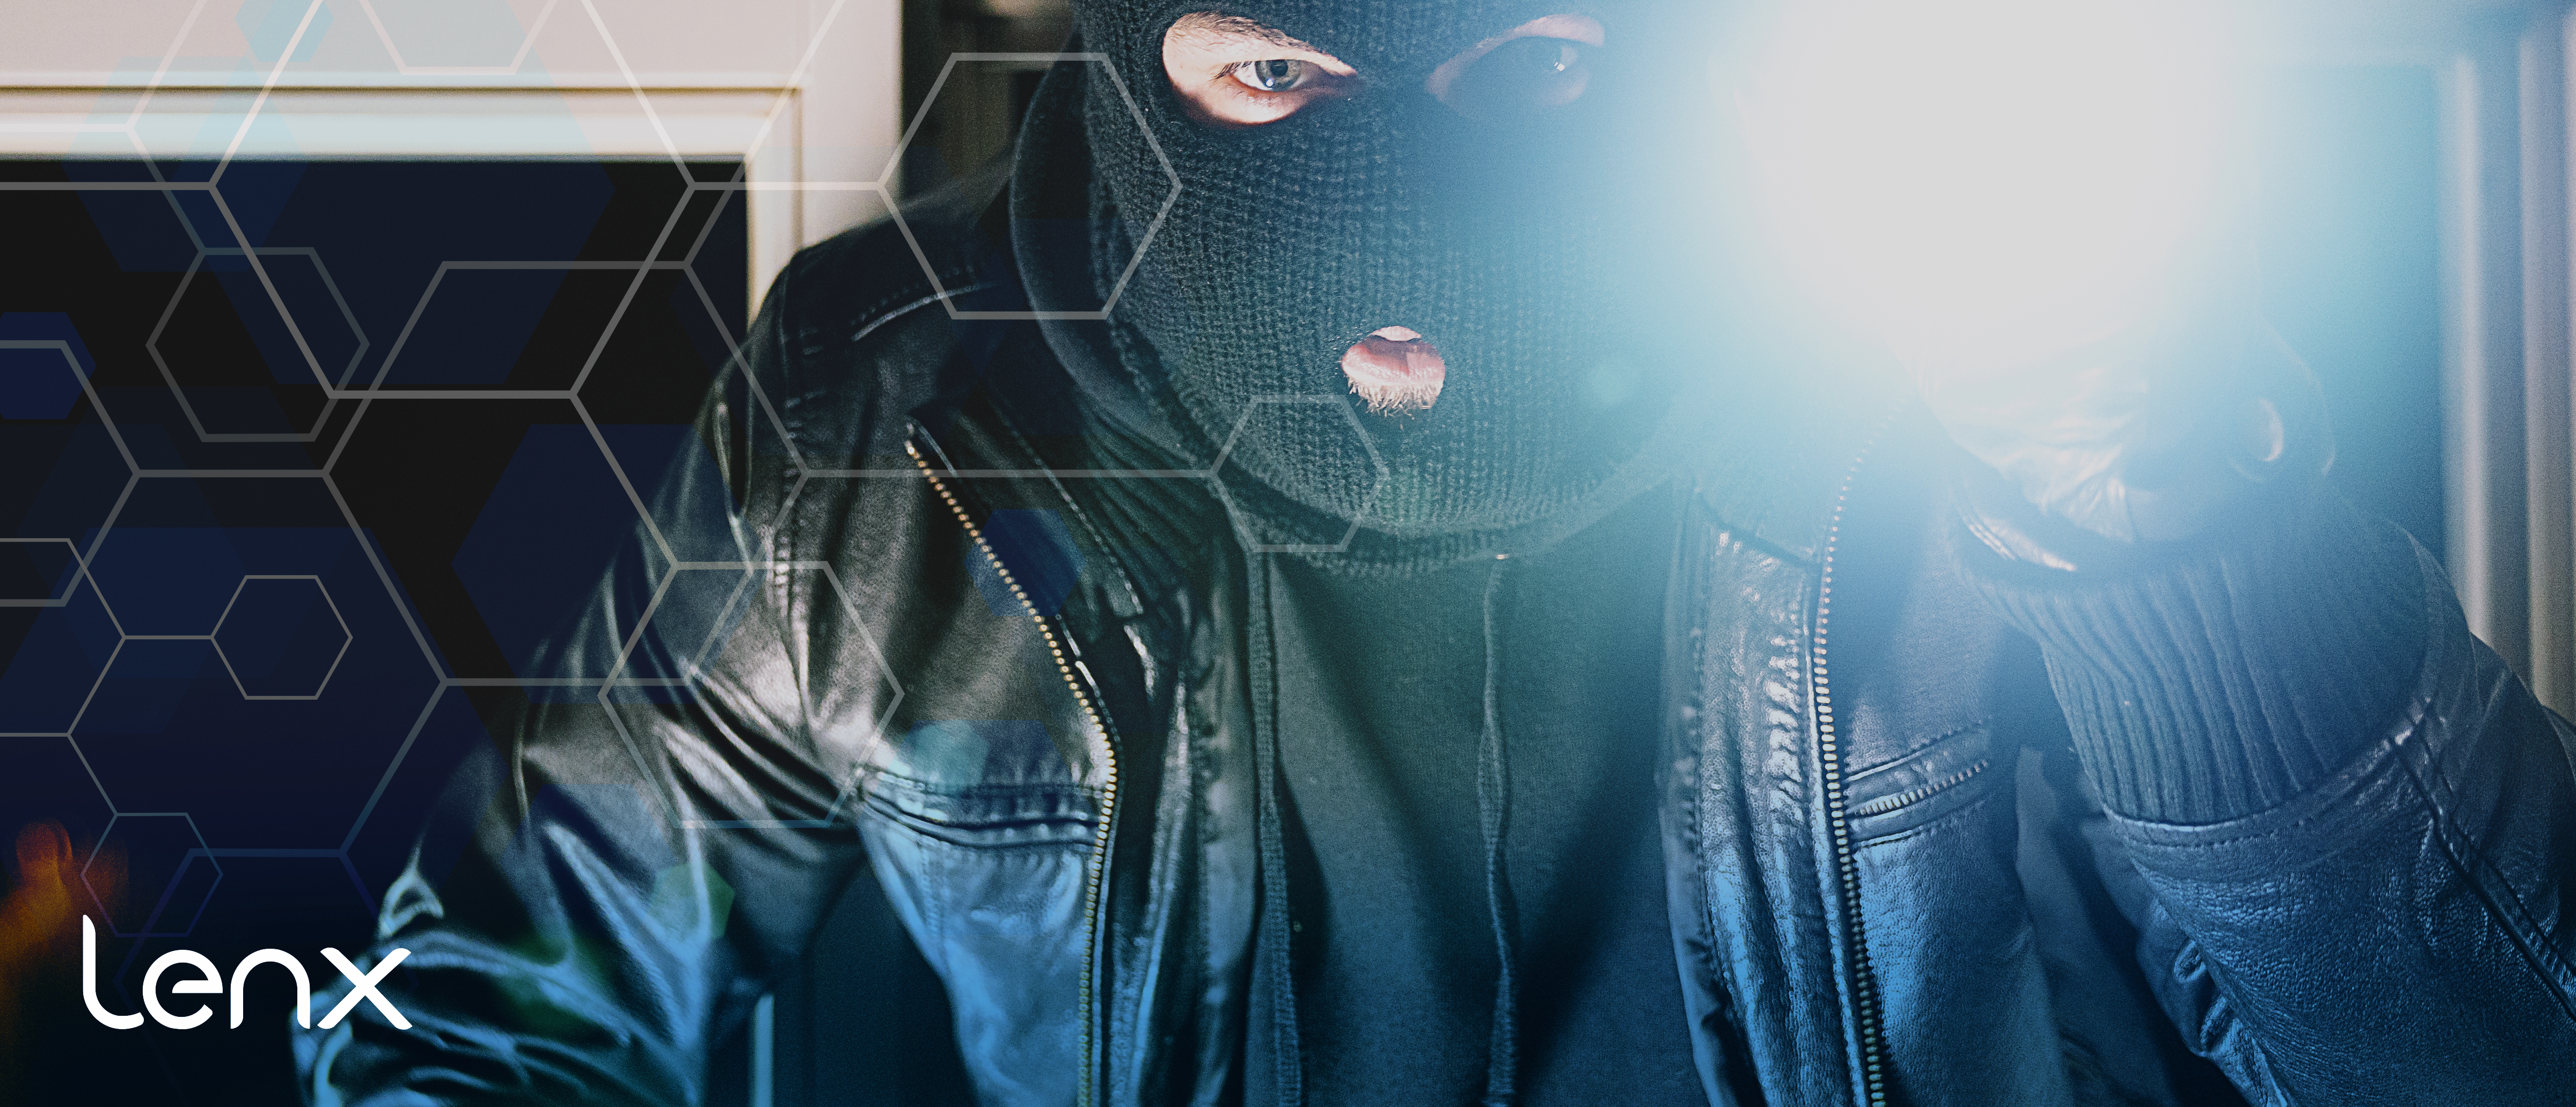 Deterring Robberies With AI Security, Active Shooter Detection, And Communication Apps